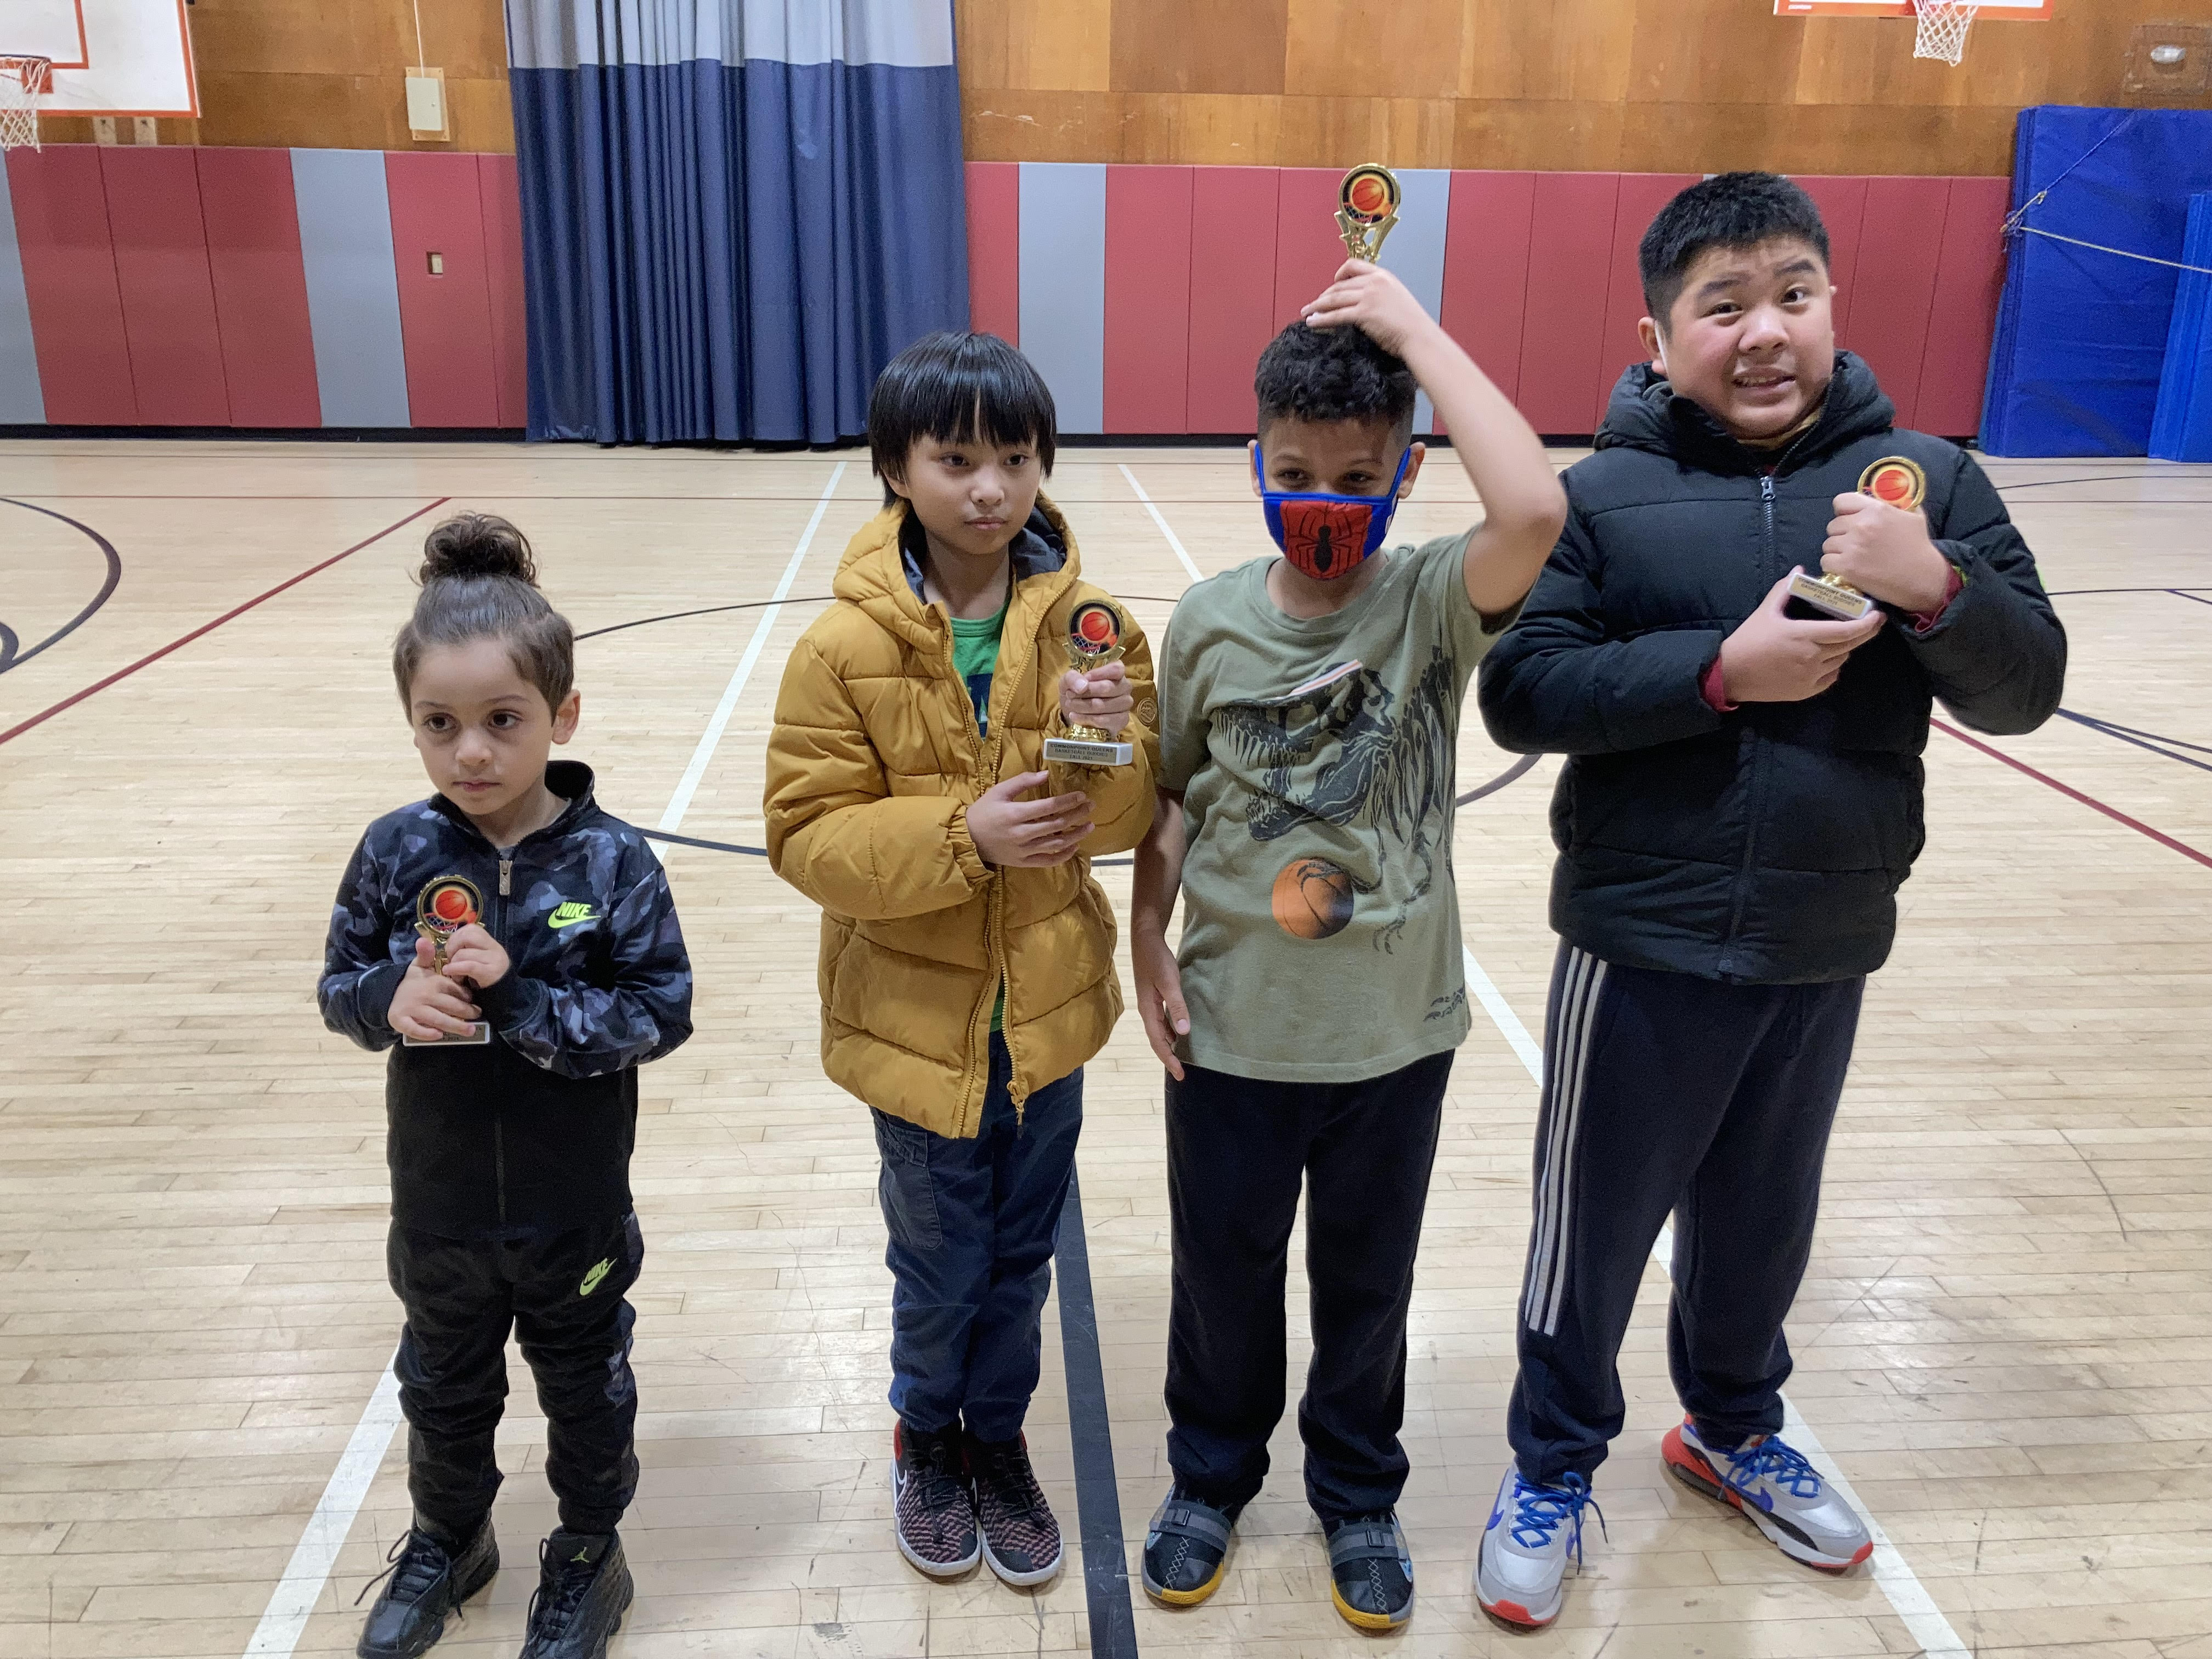 A group of children with developmental disabilities standing in a gymnasium participating in programs.